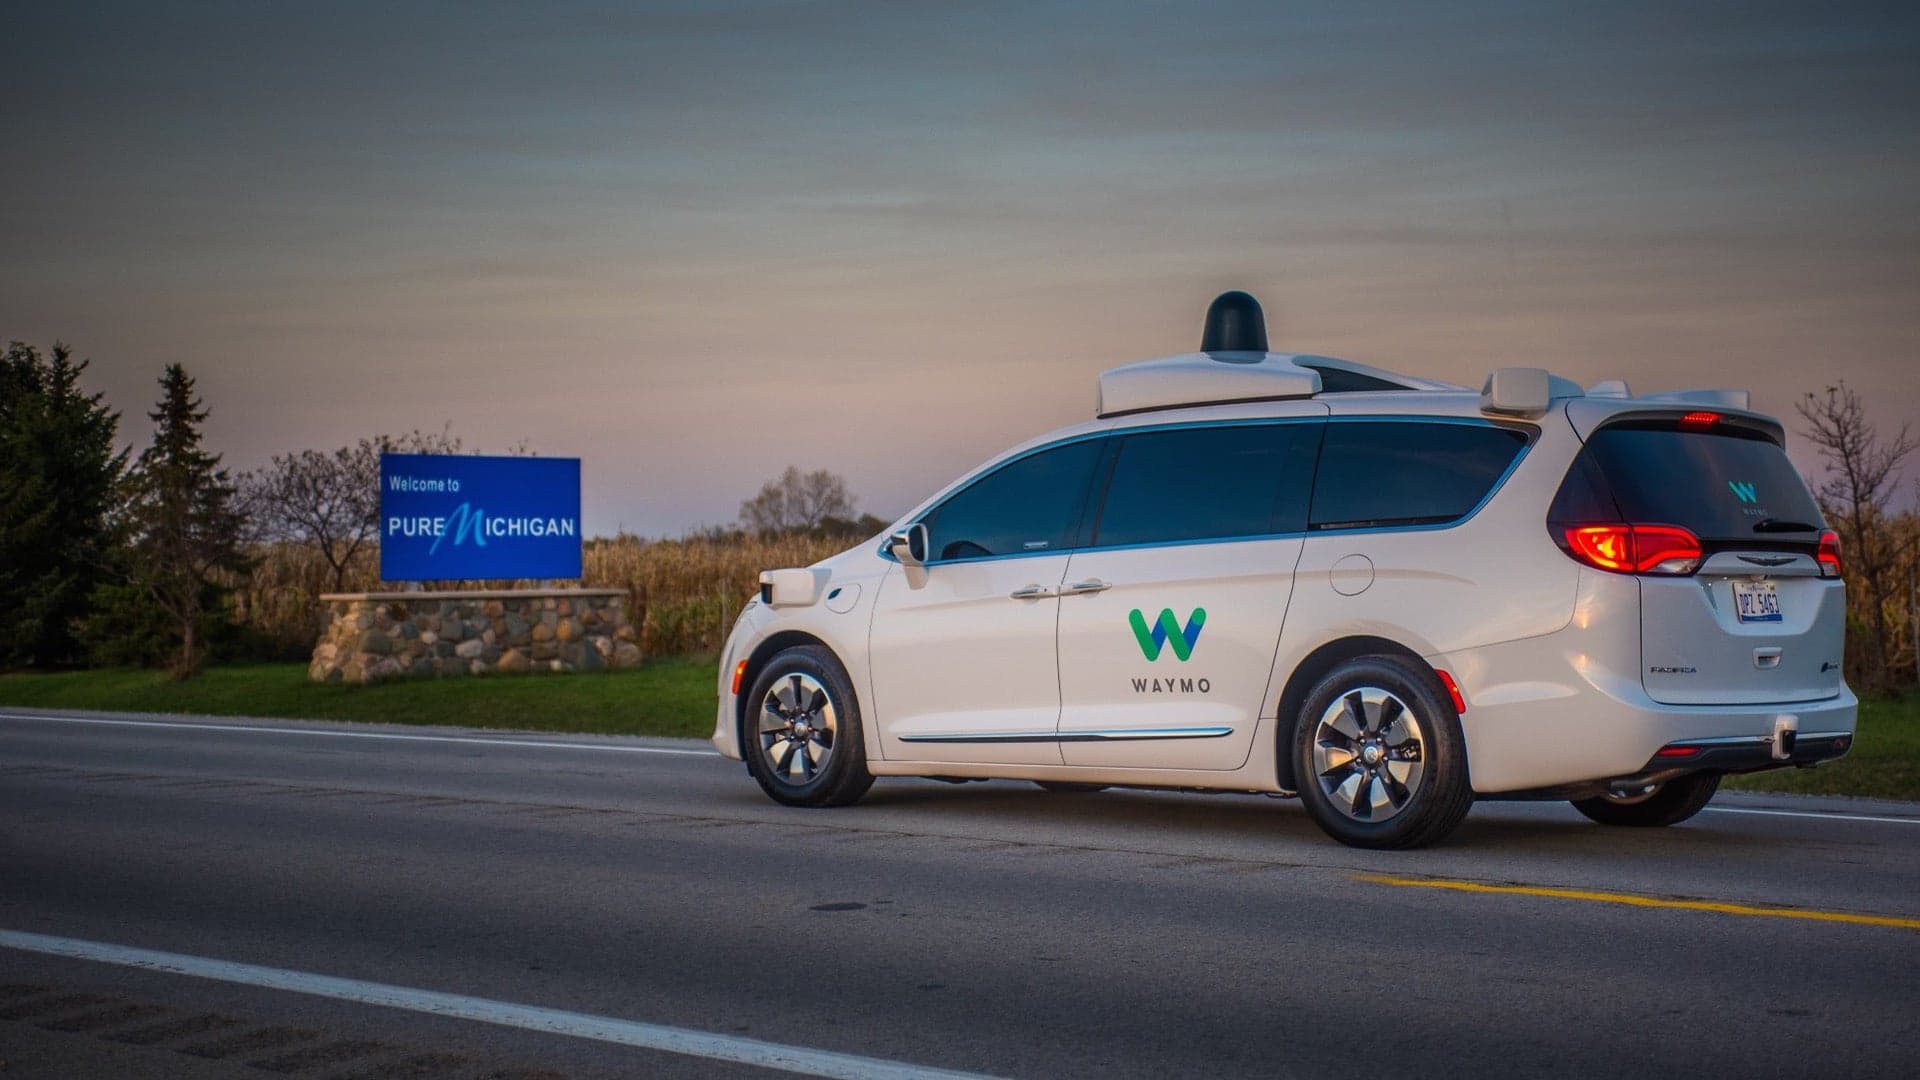 The Next Challenge for Waymo’s Self-Driving Cars Is a Michigan Winter